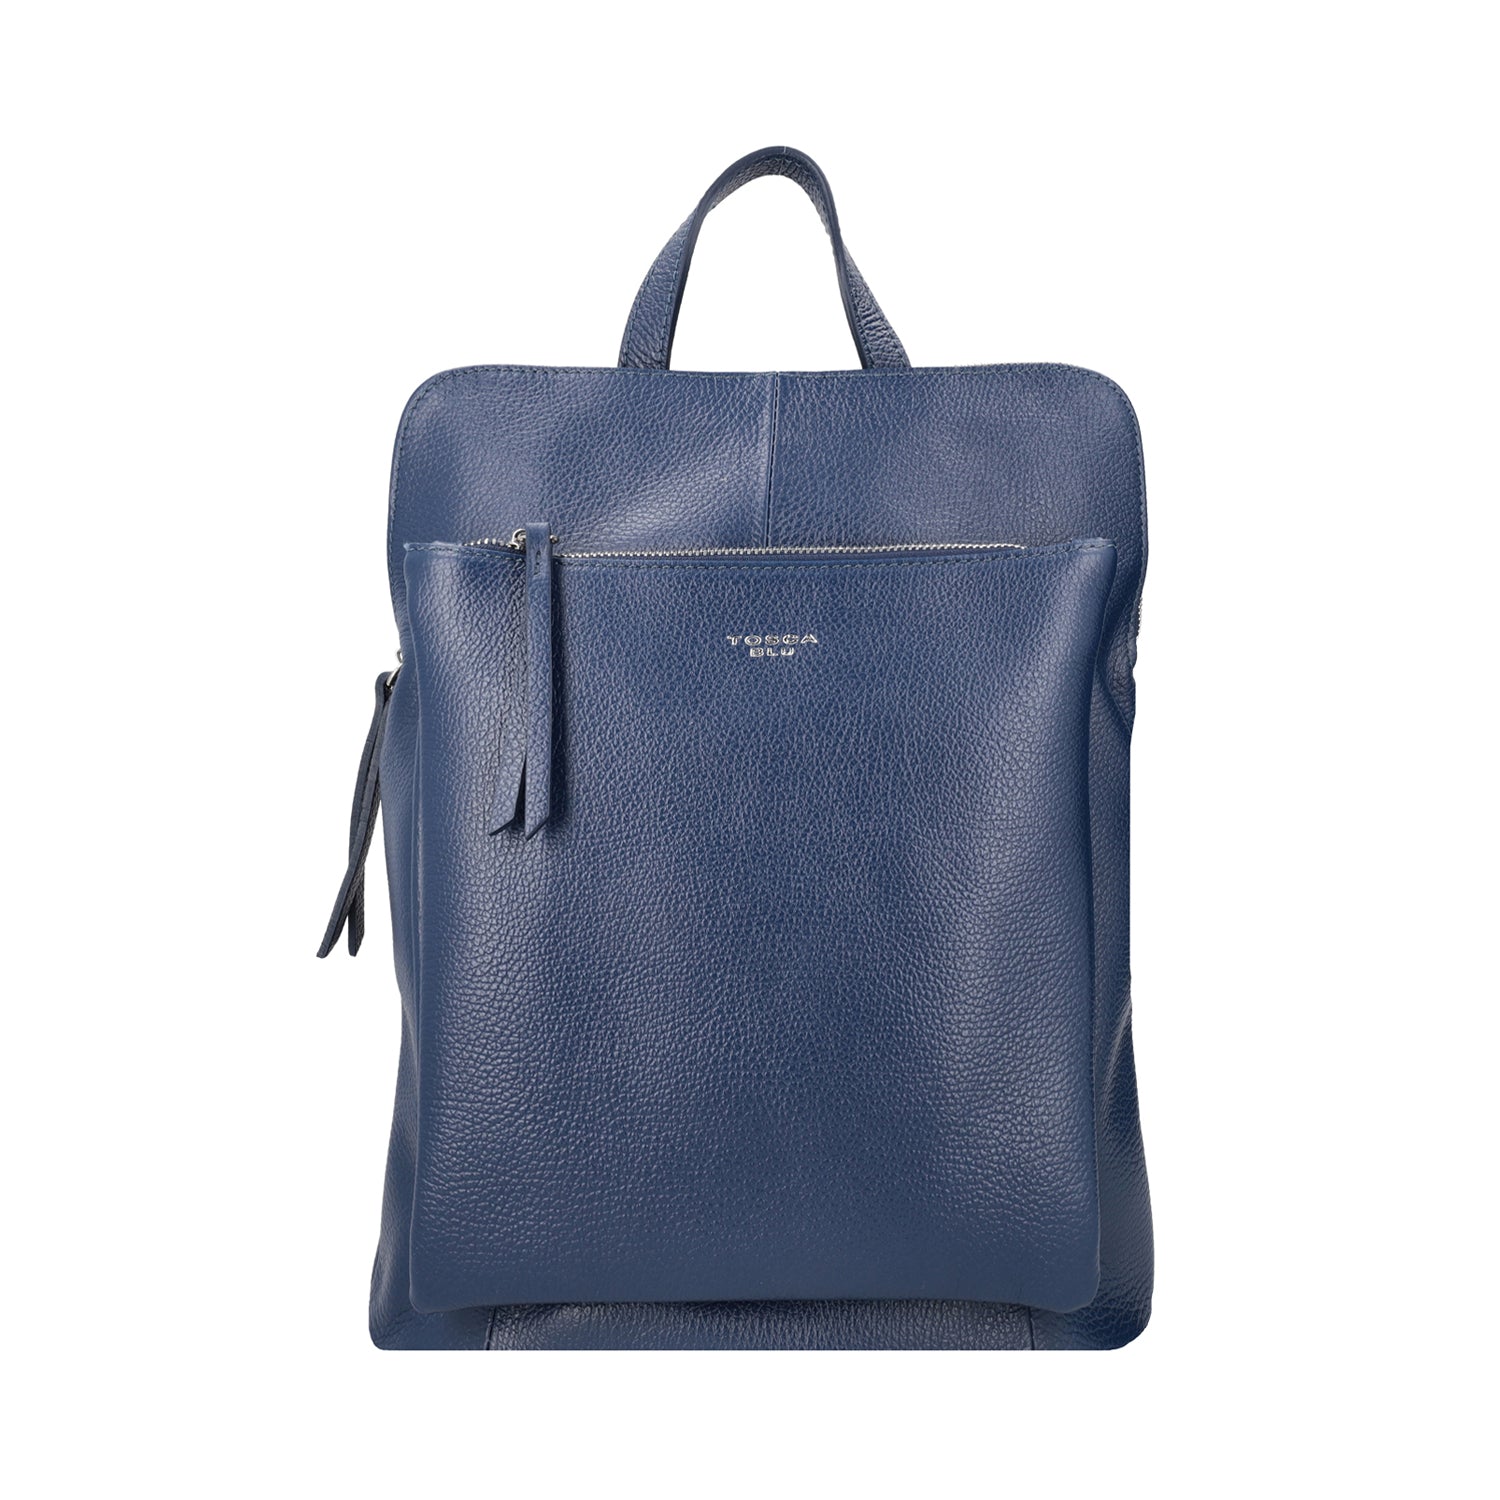 BLUE LEATHER BACKPACK WITH ZIPPER CLOSURE